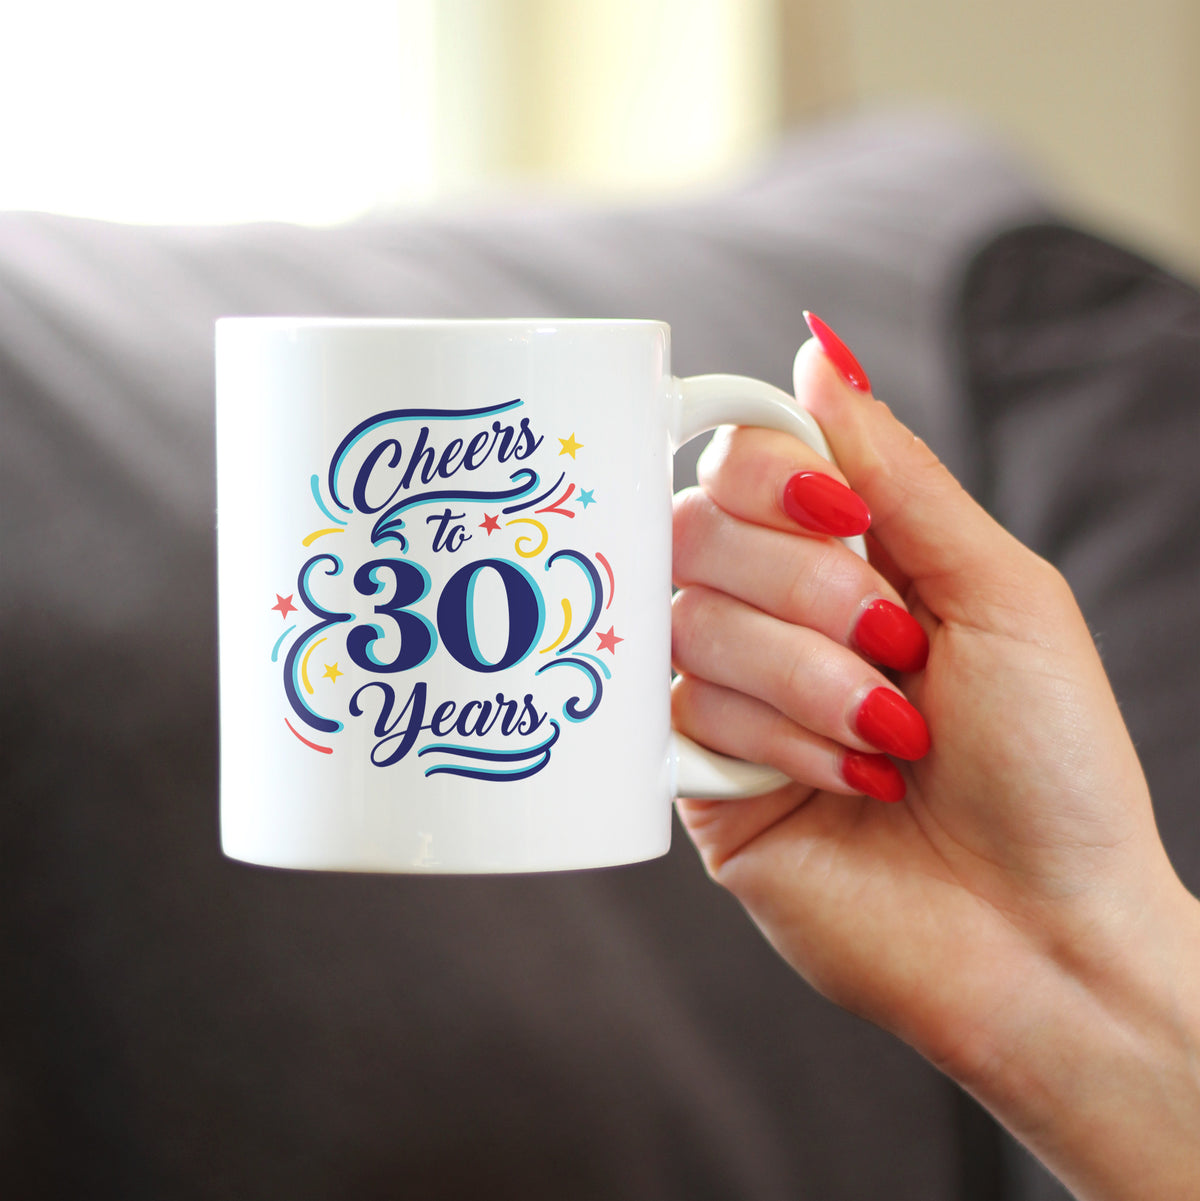 Cheers to 30 Years - Coffee Mug Gifts for Women &amp; Men - 30th Anniversary Party Decor